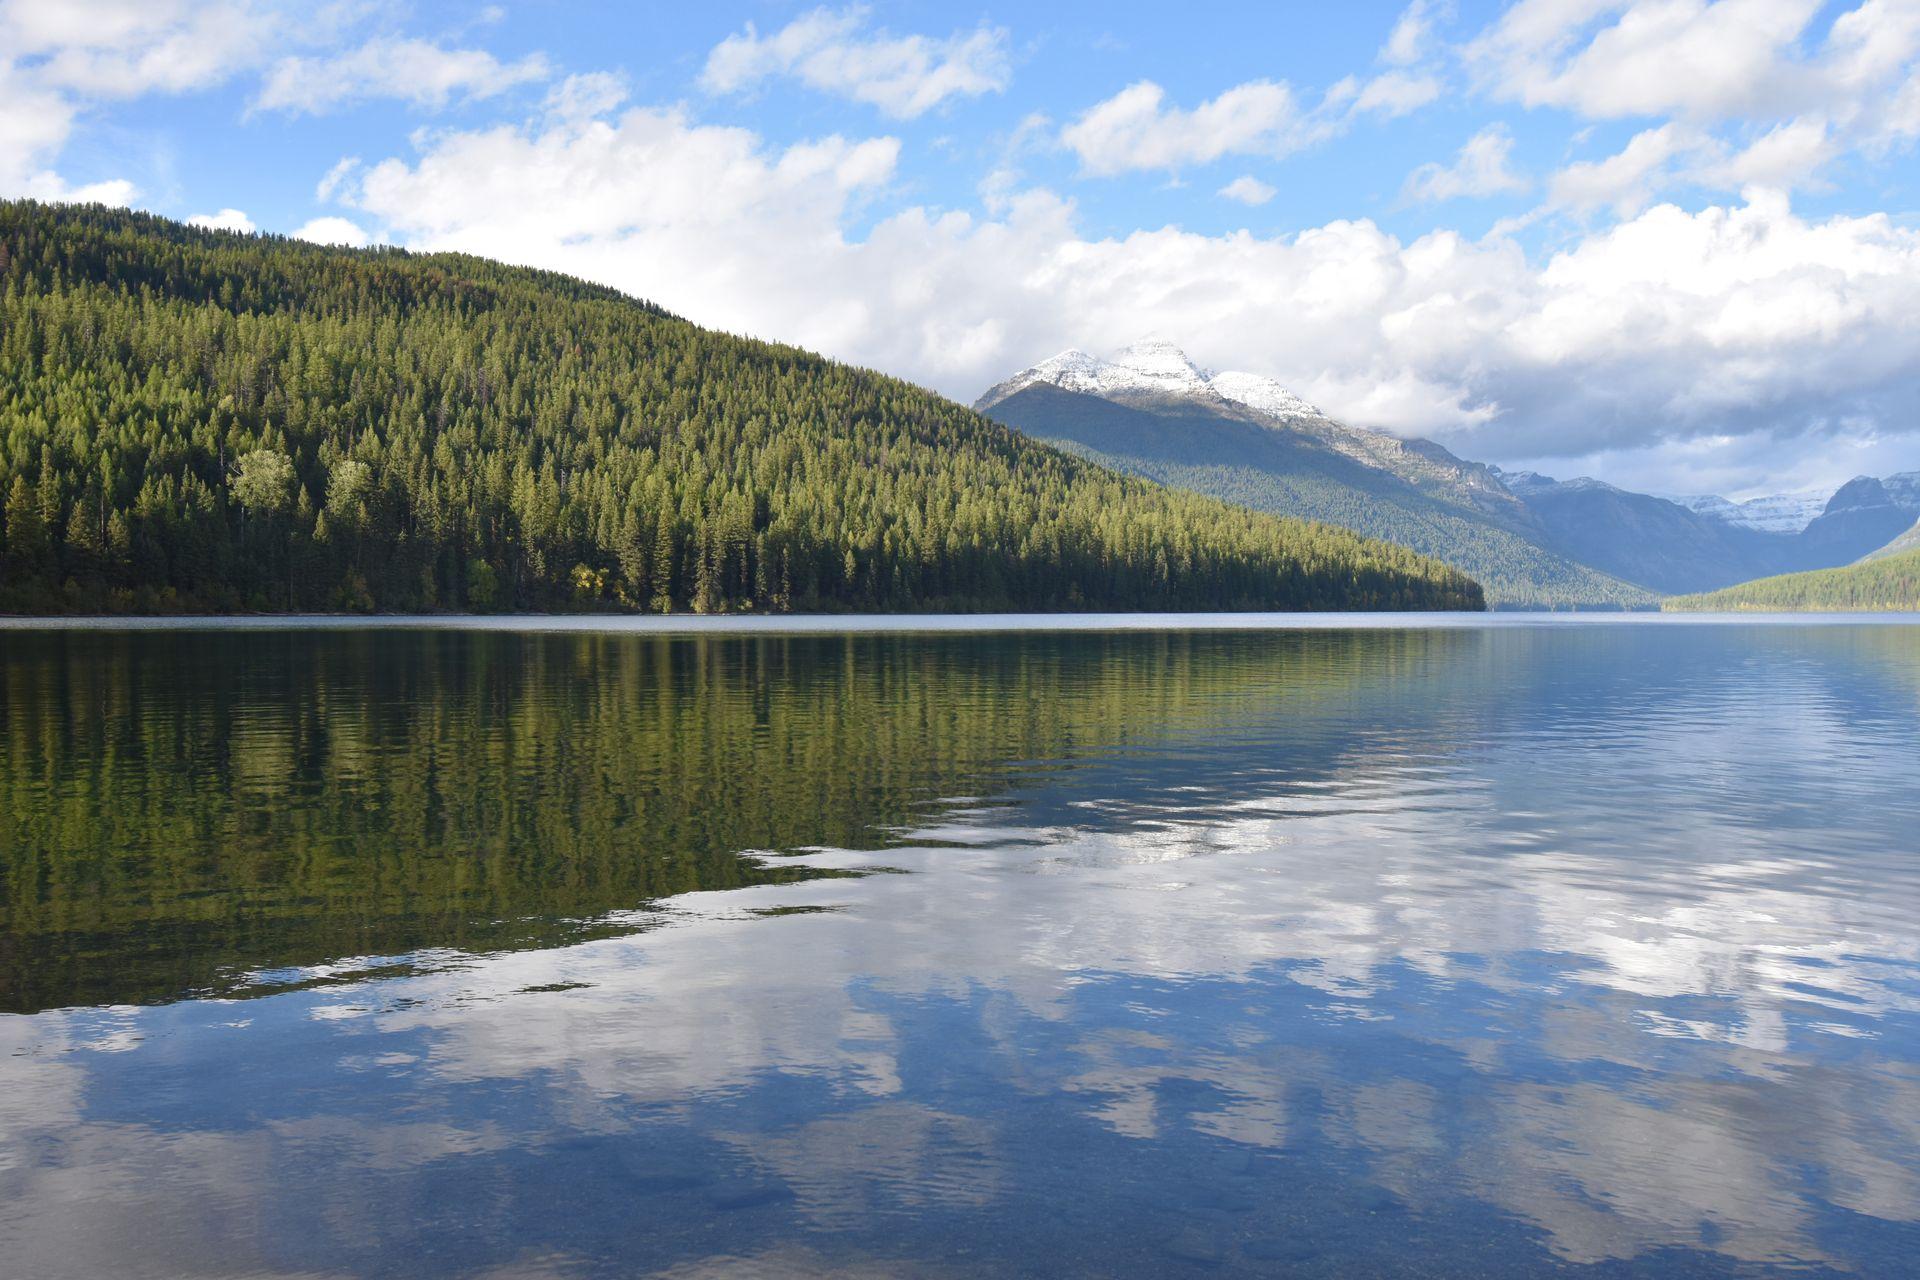 A mountain covered in trees reflecting down into the water at Bowman Lake.